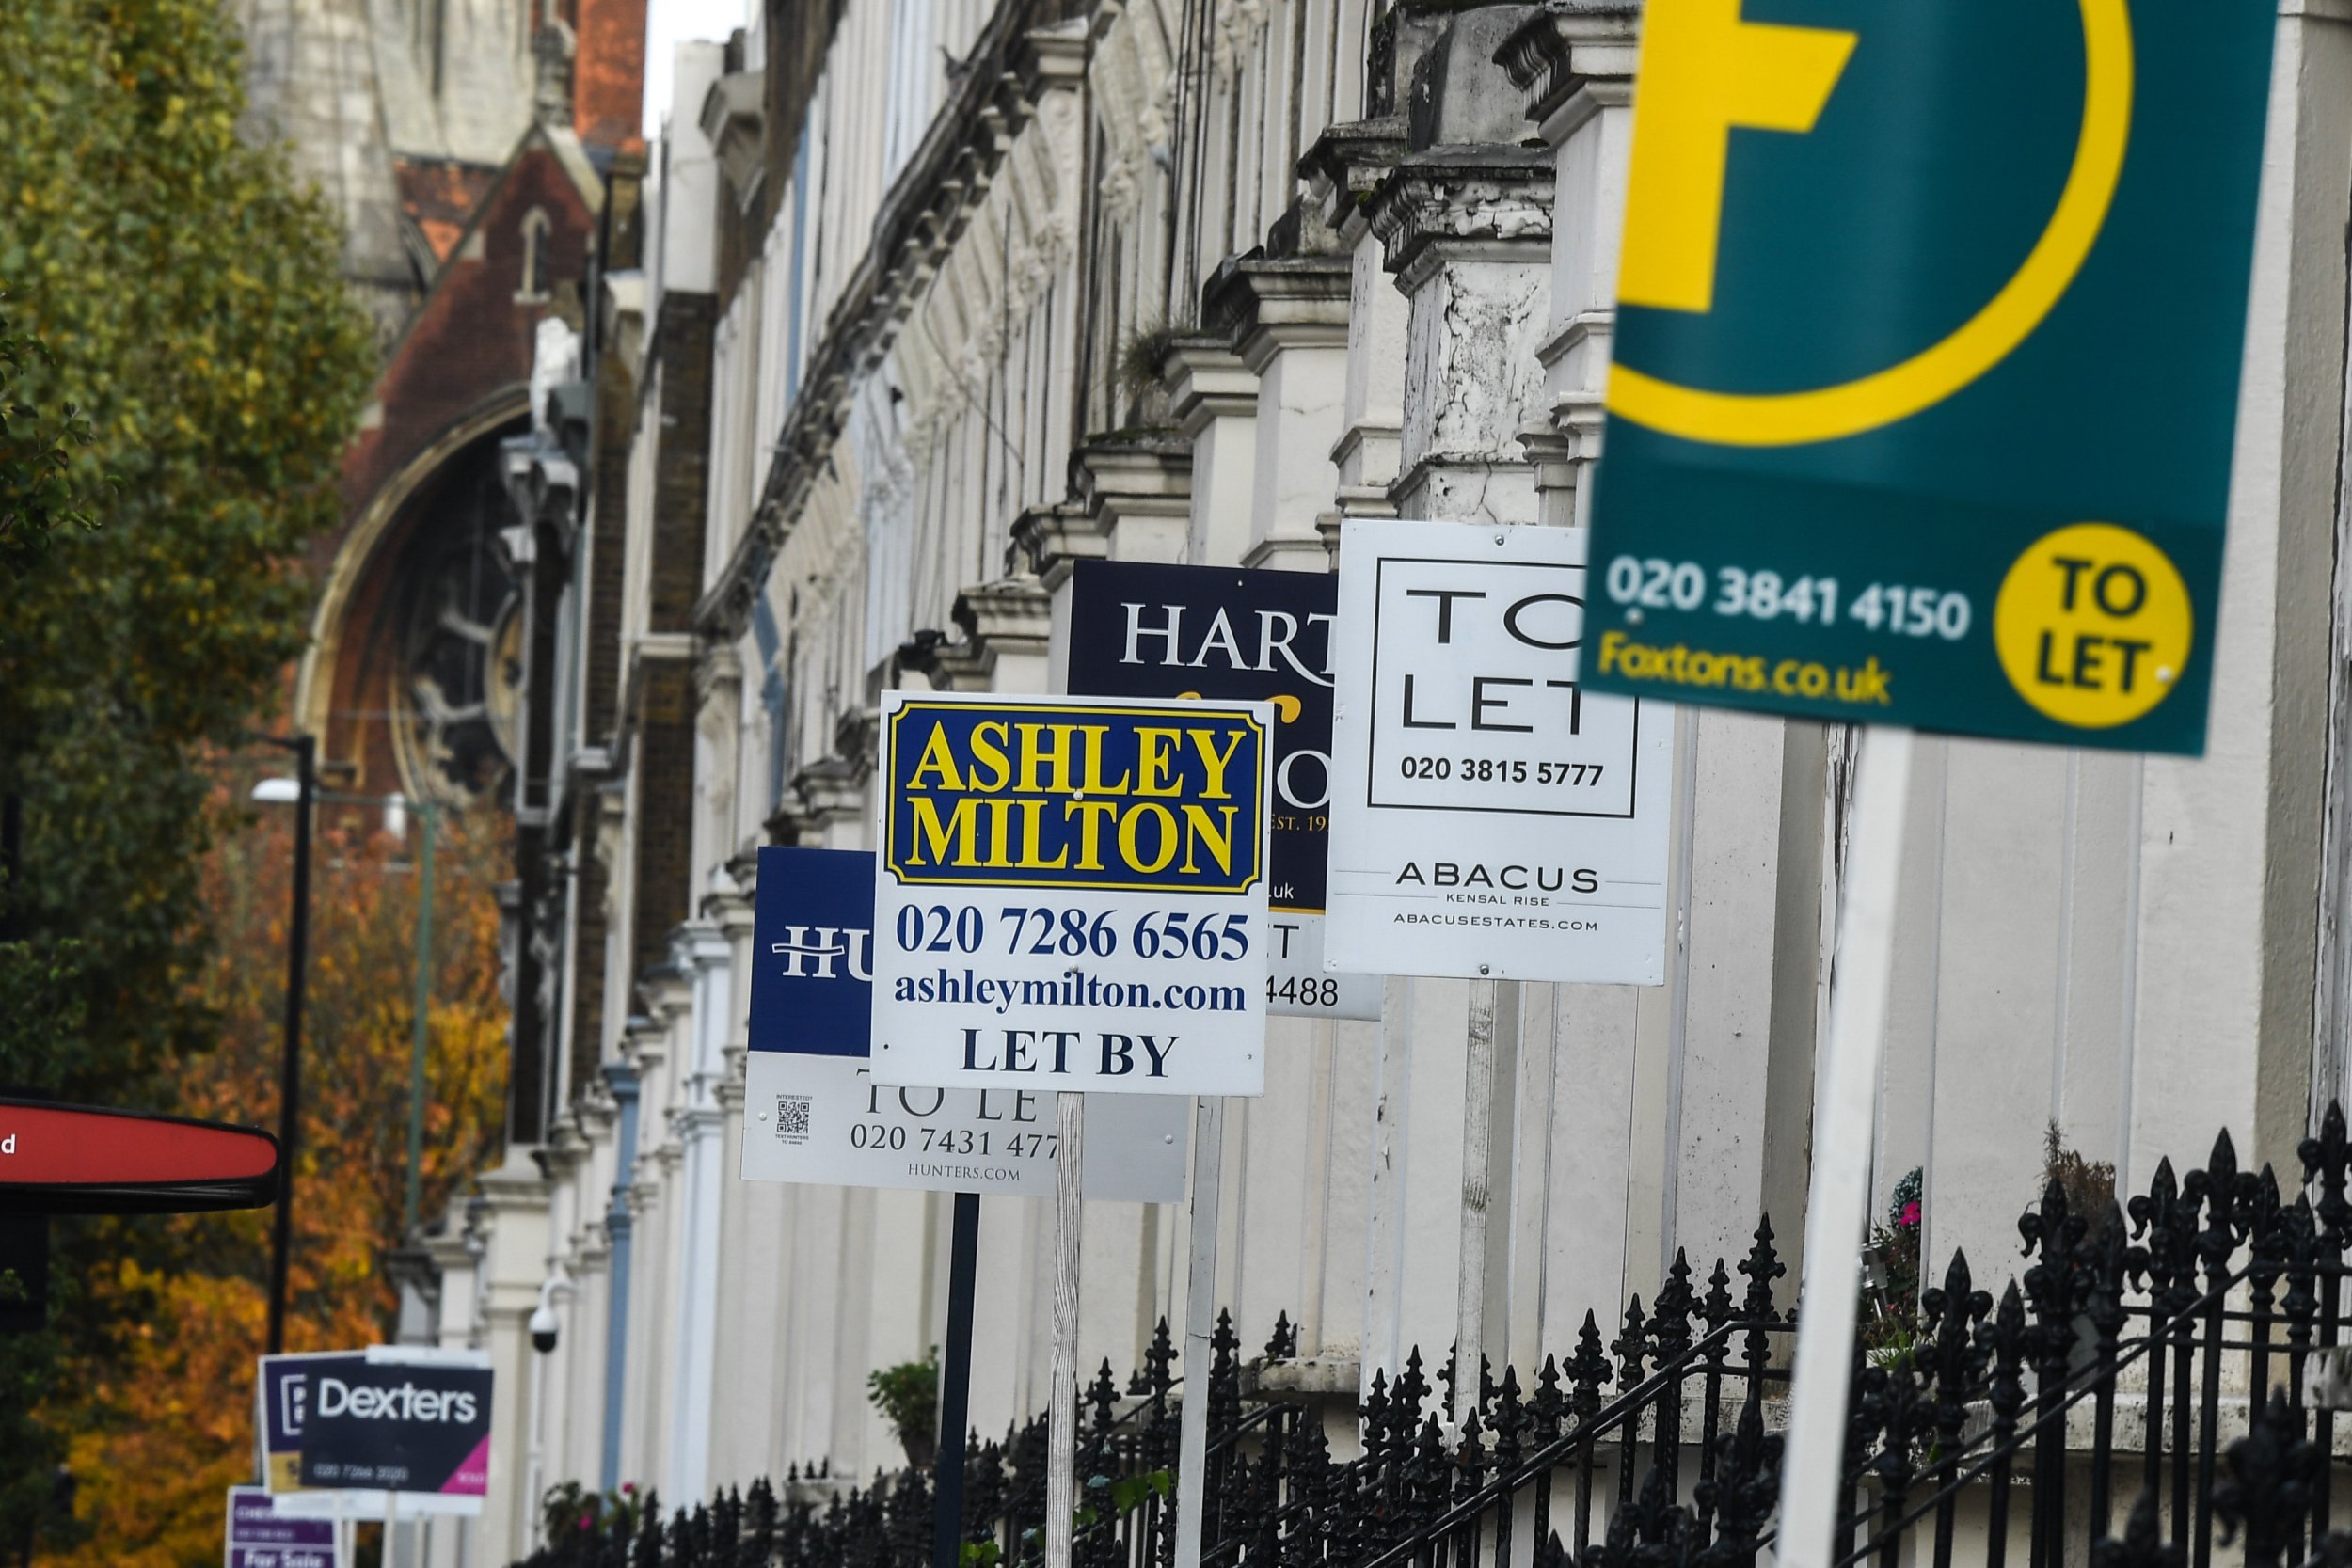 House buyers call on Rishi Sunak to extend stamp duty holiday beyond March